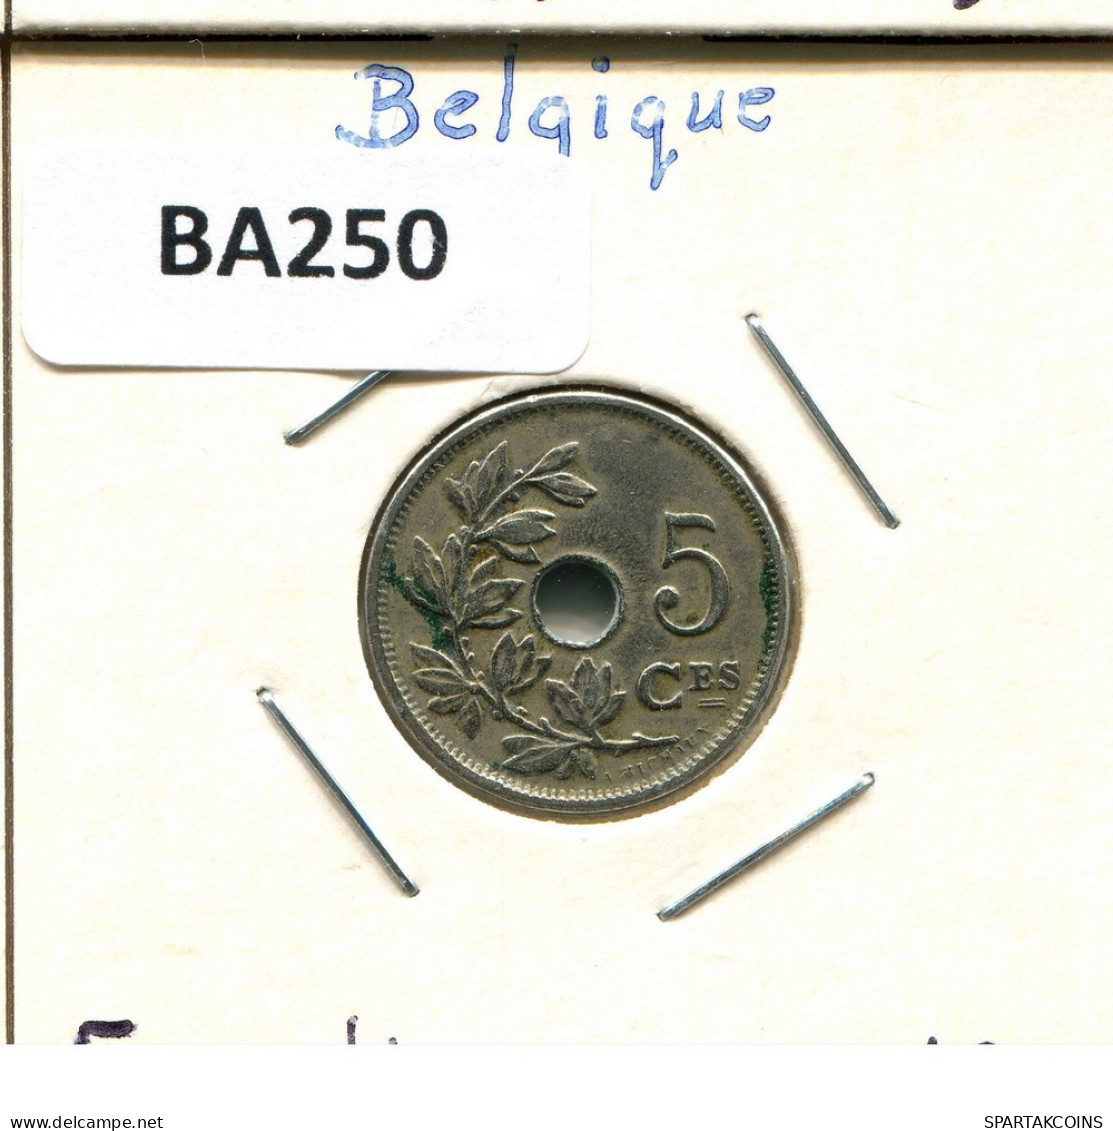 5 CENTIMES 1920 FRENCH Text BELGIUM Coin #BA250.U - 5 Centimes